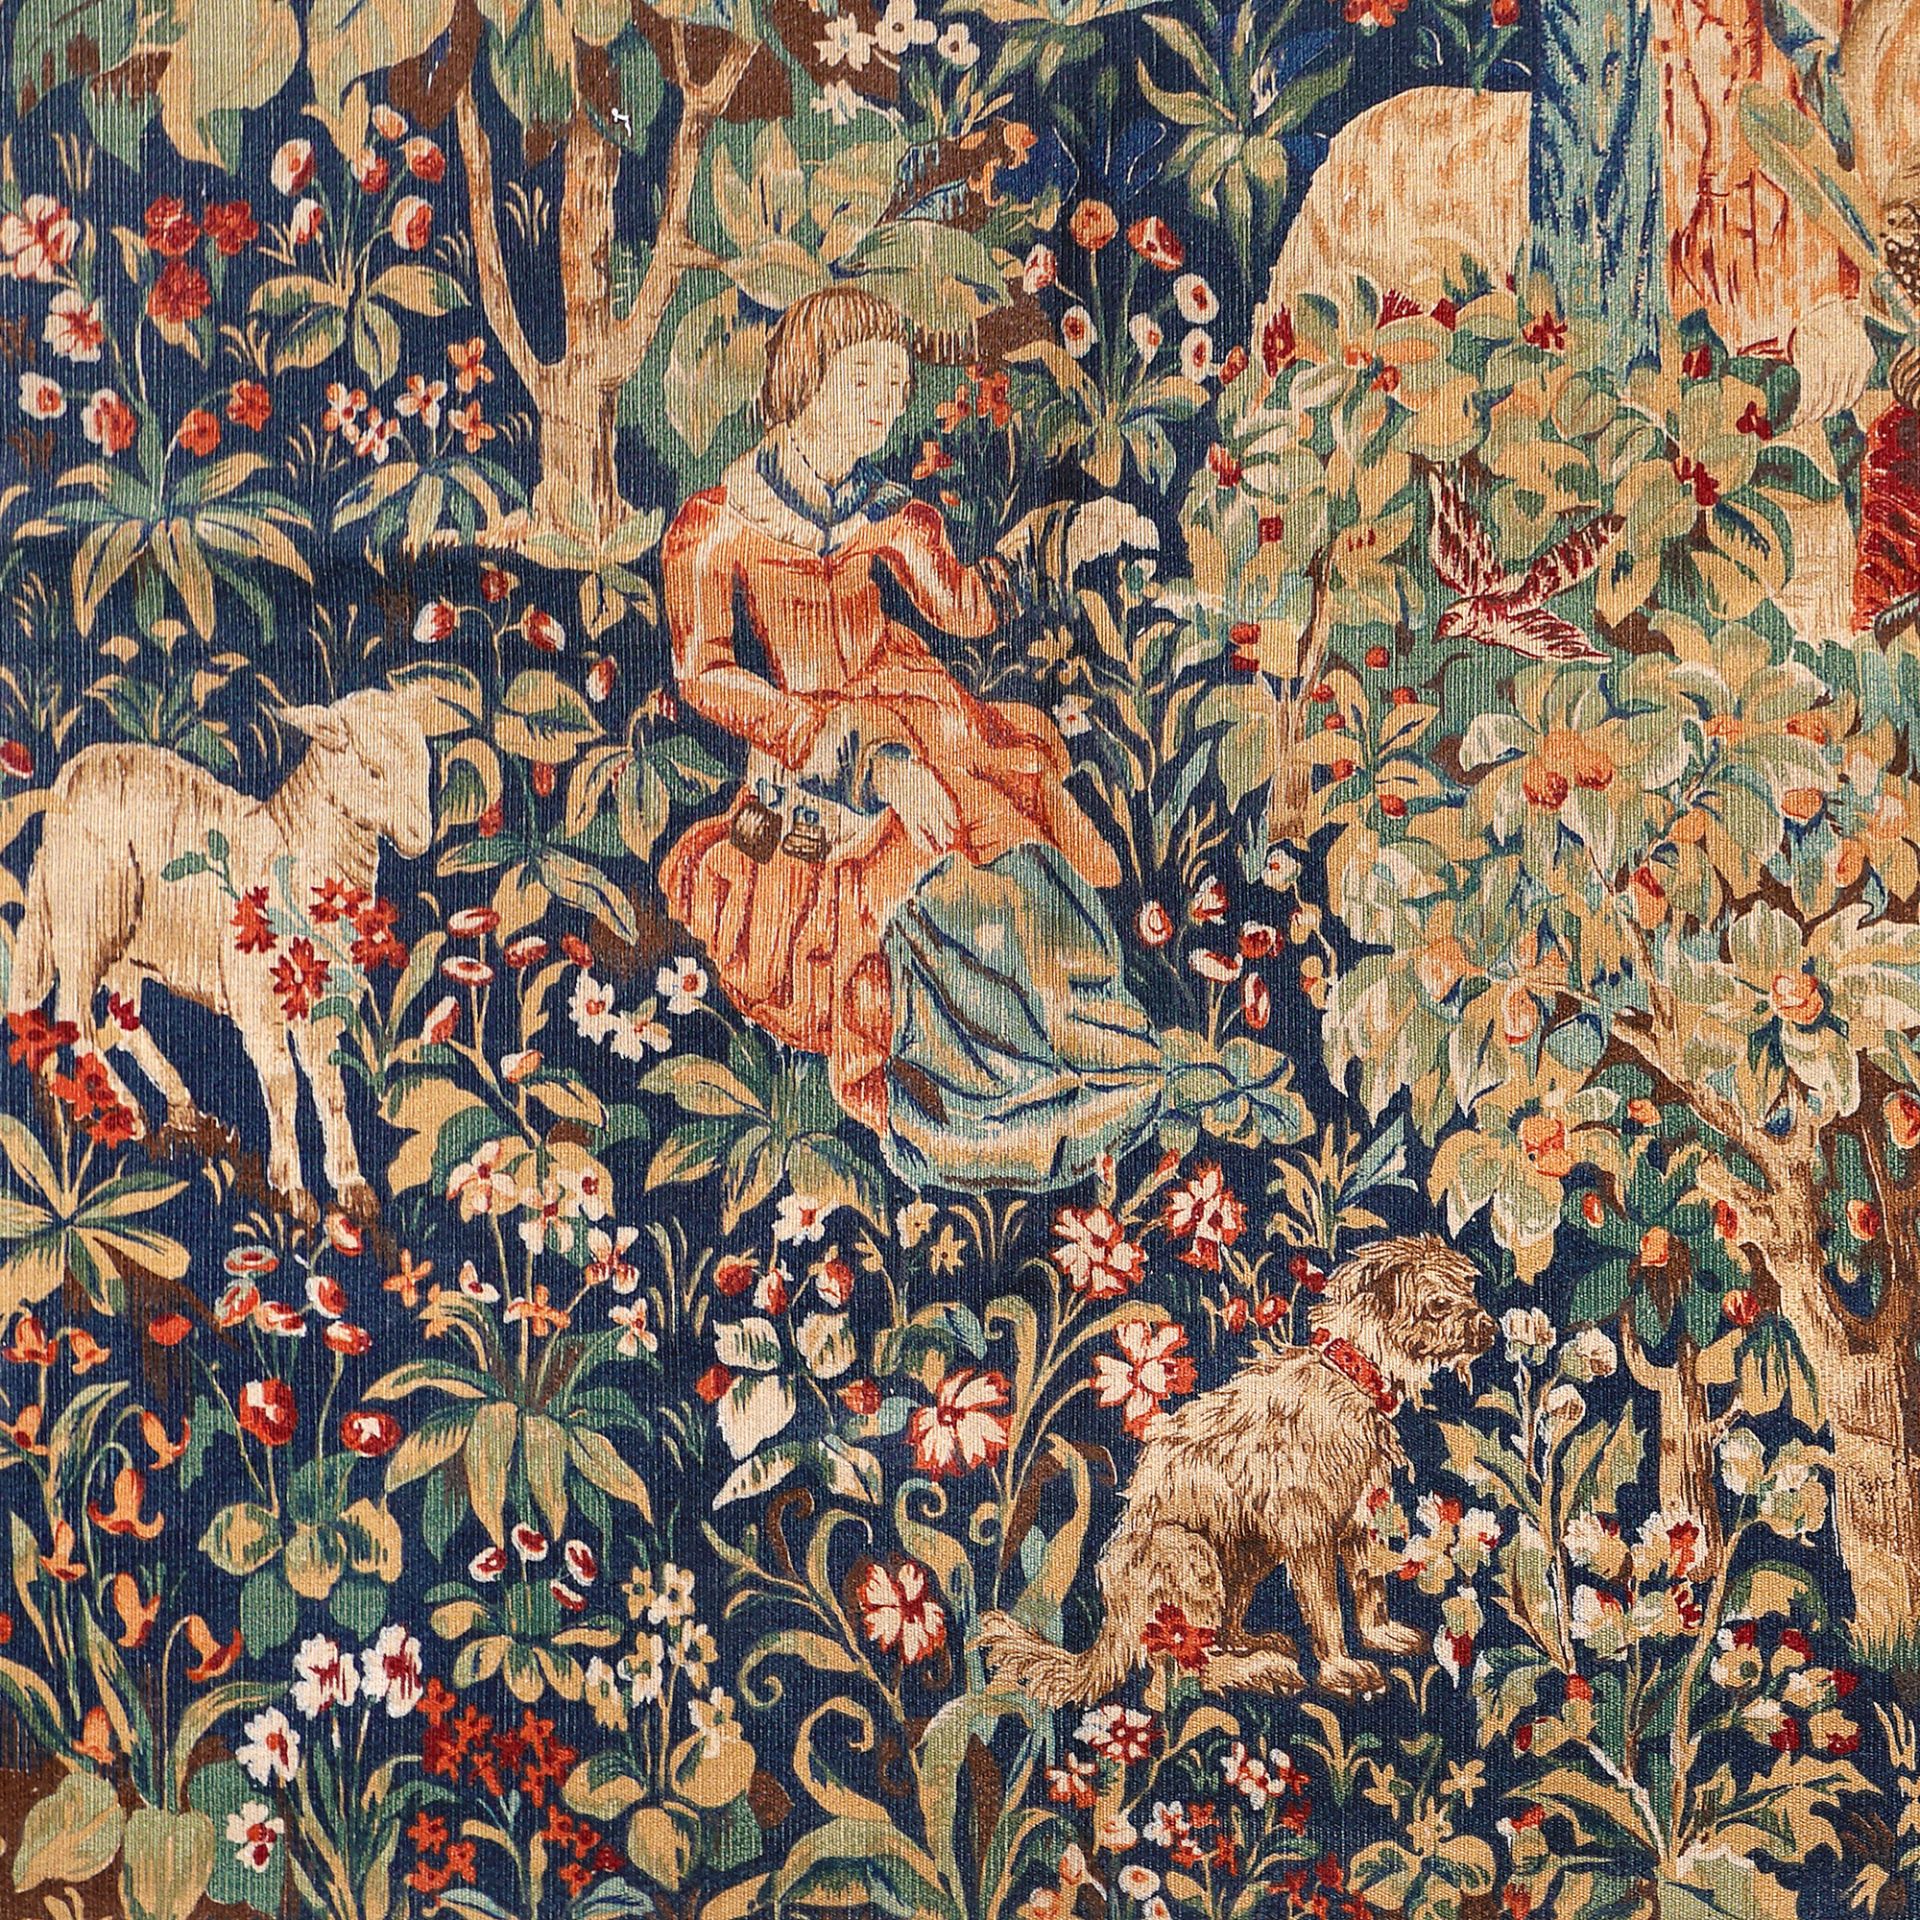 Wool tapestry, illustrating the hunt, Netherlands, 18th century - Image 3 of 3